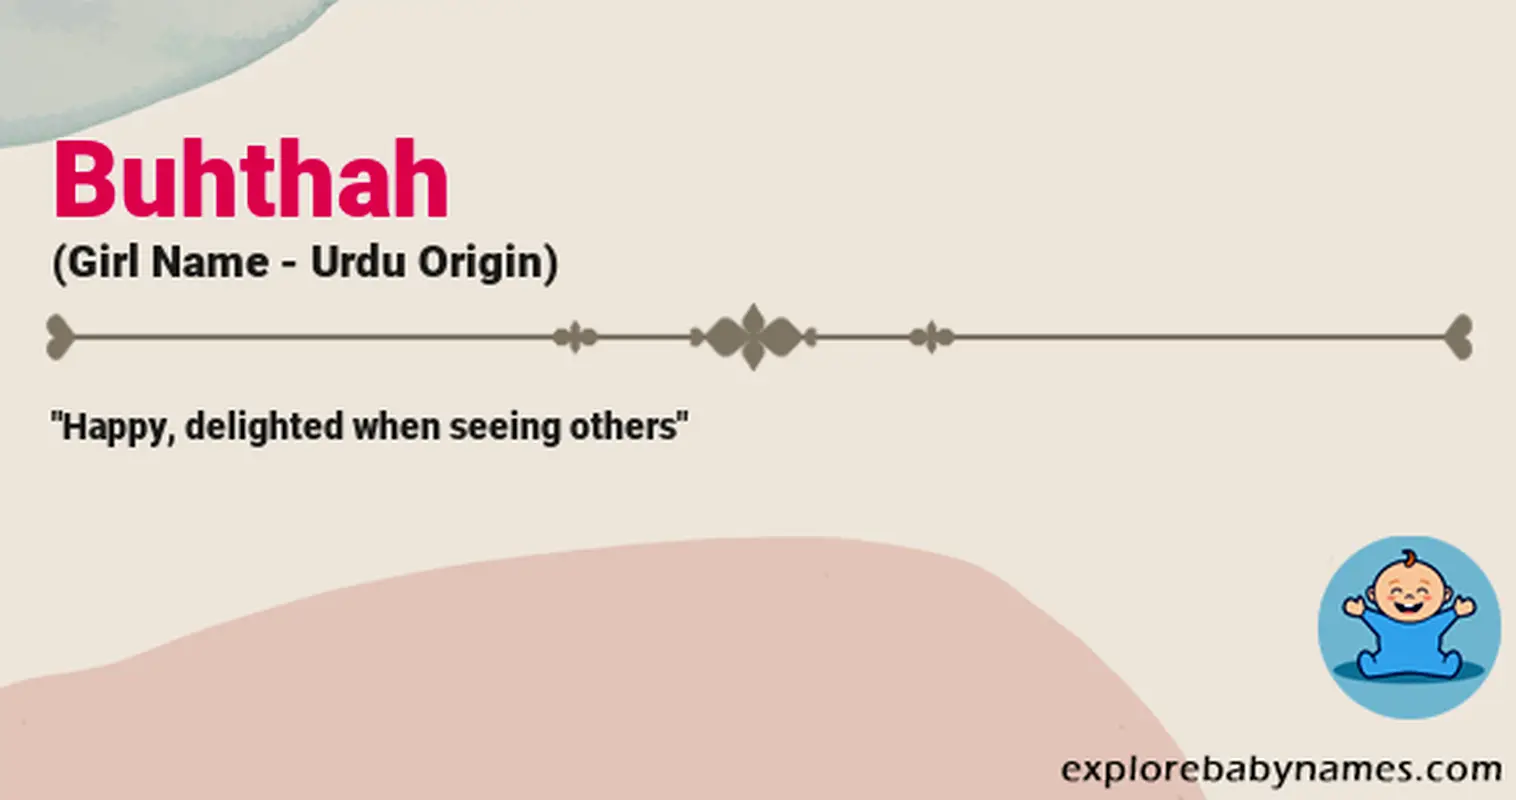 Meaning of Buhthah